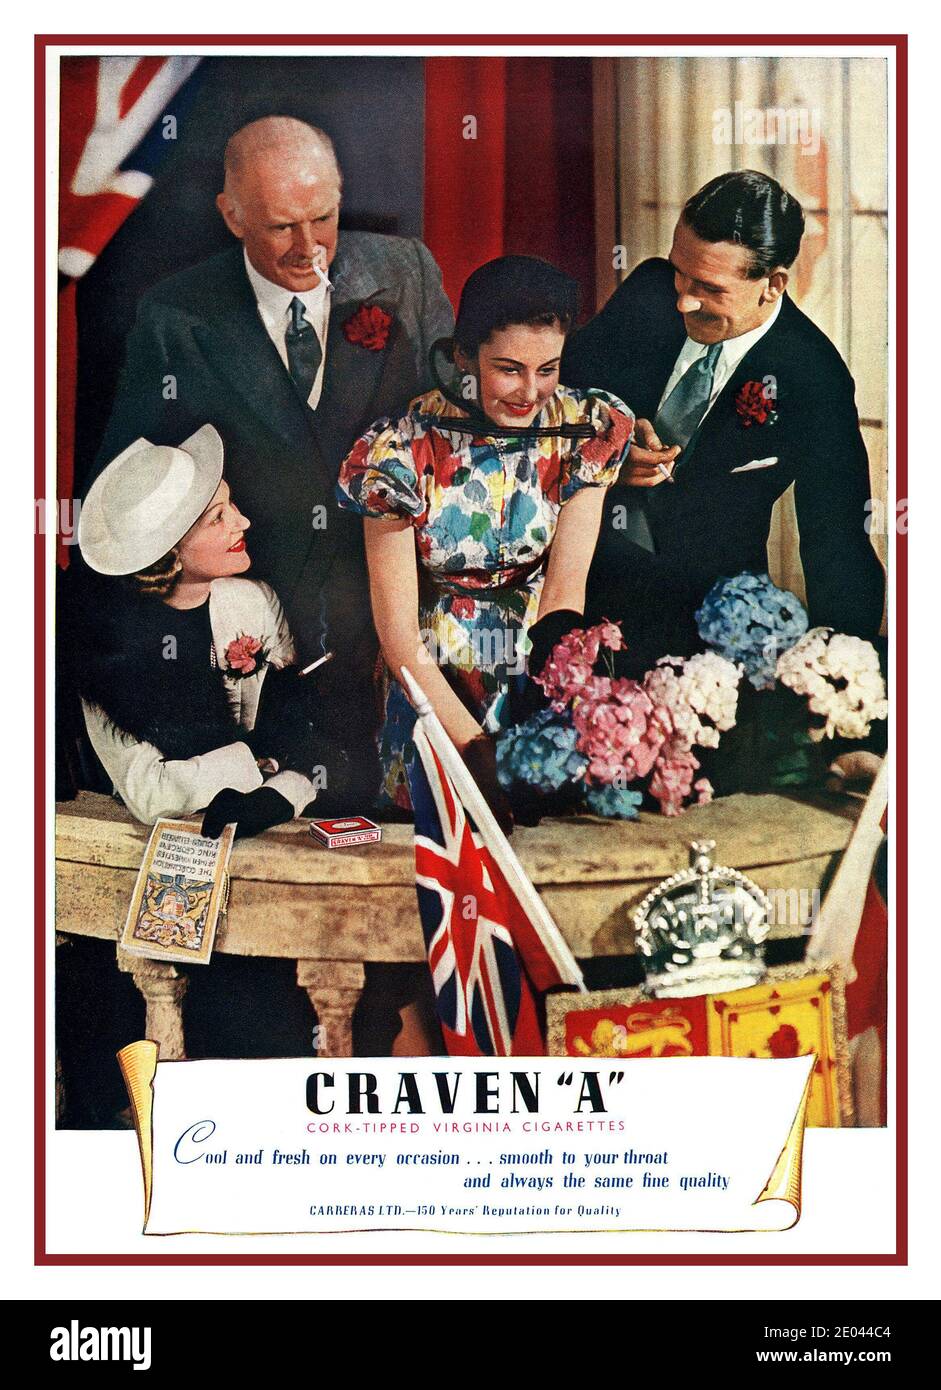 CIGARETTE ADVERTISING 1930’s Craven A cigarette ad from 1937 reflecting the royal occasion of The Coronation of George VI and his wife Elizabeth as king and queen of the United Kingdom and the Dominions of the British Commonwealth which took place at Westminster Abbey, London, on 12 May 1937. Illustration shows balcony and Coronation brochure Flags heraldry etc.with smart smoking onlookers celebrating. Stock Photo